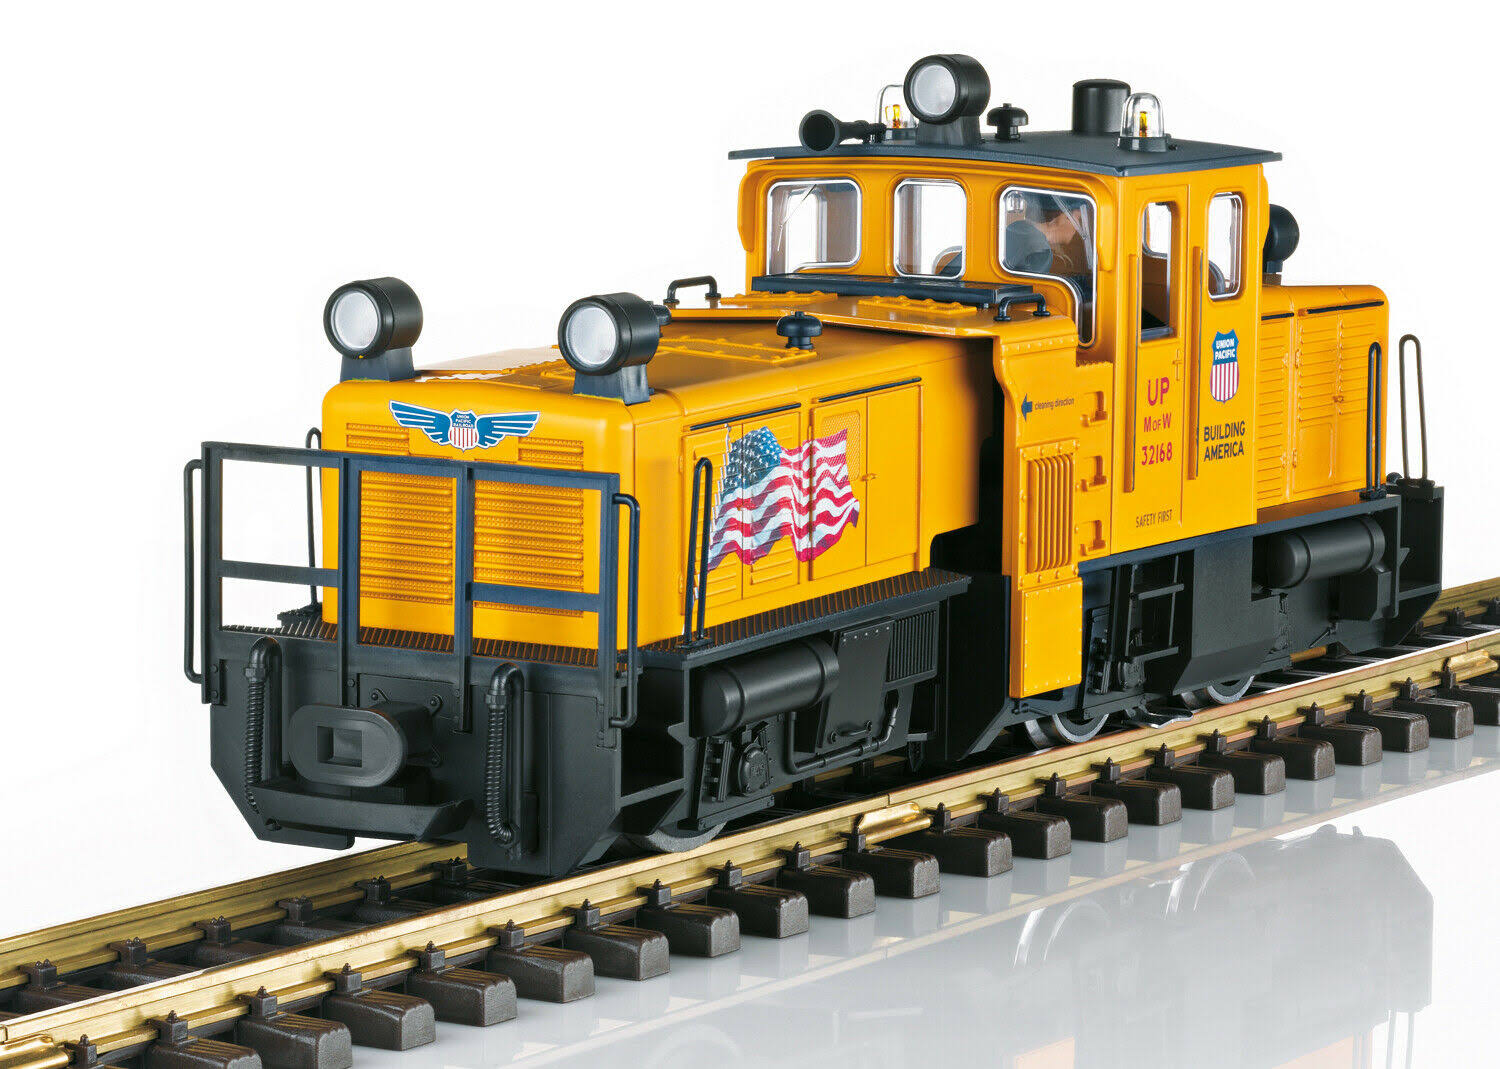 LGB 21672 Union Pacific Track Cleaning Diesel Locomotive (DCC-Sound)